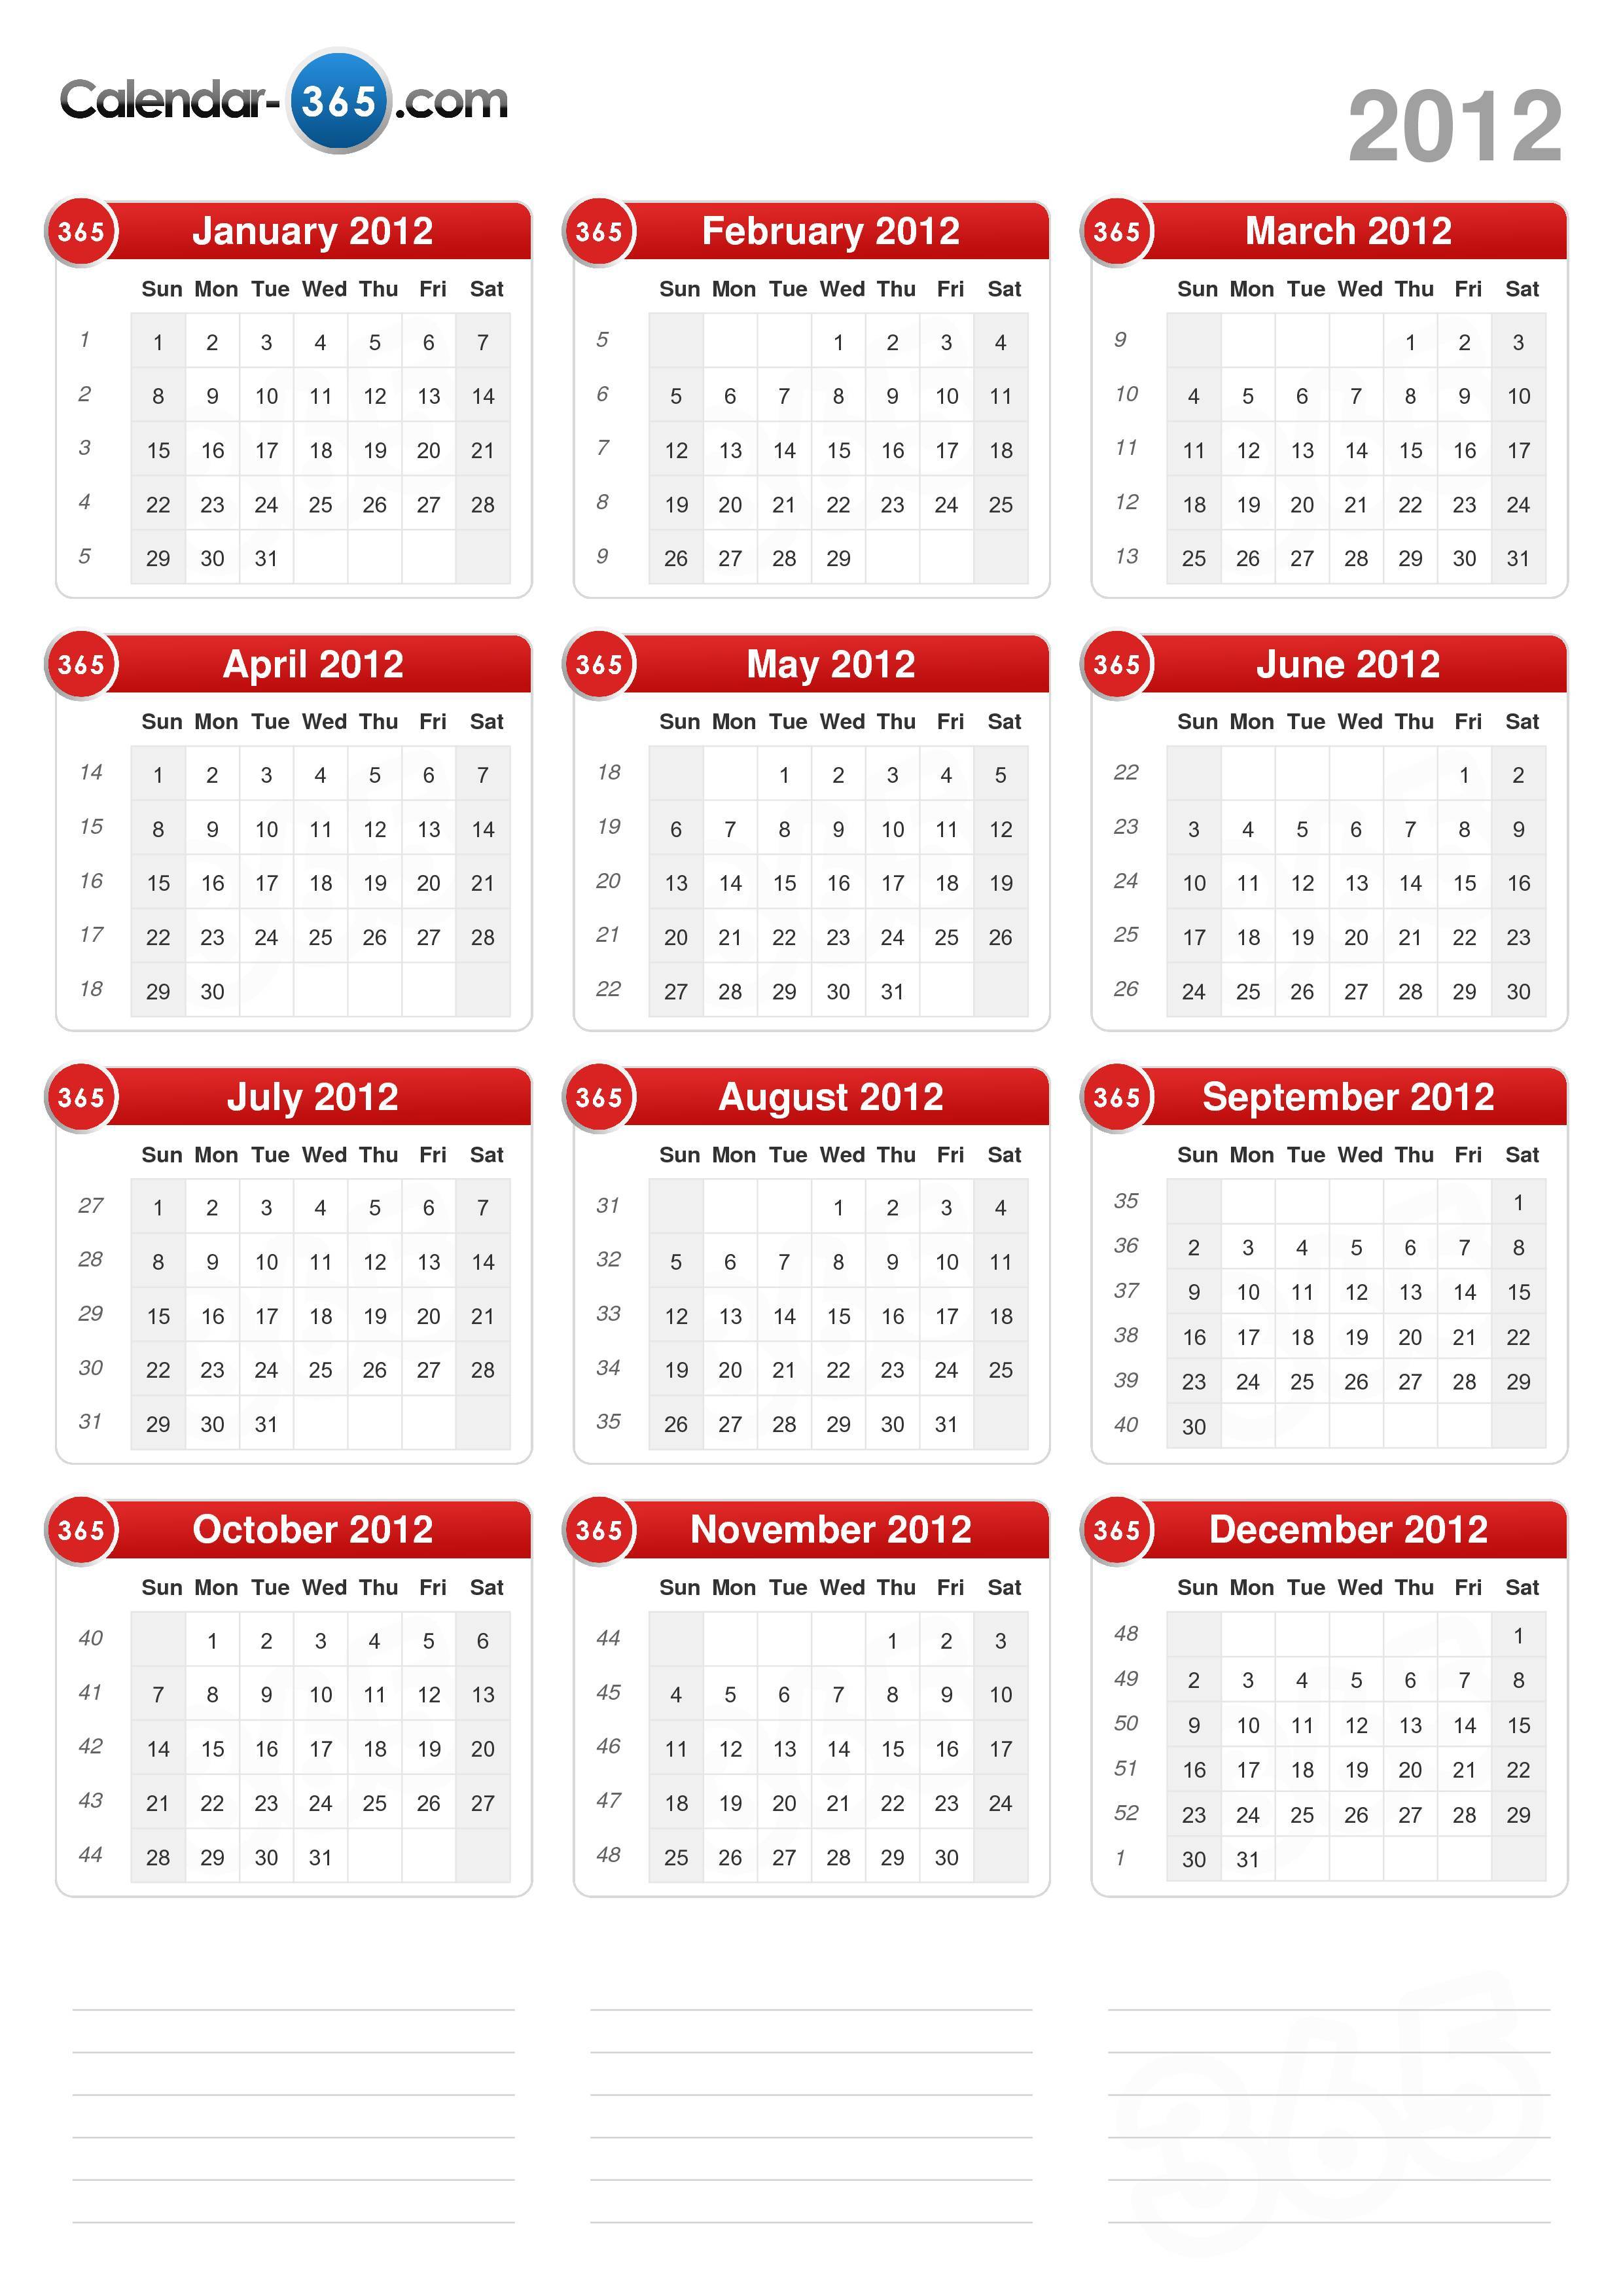 Download the printable calendar 2012 with holidays.